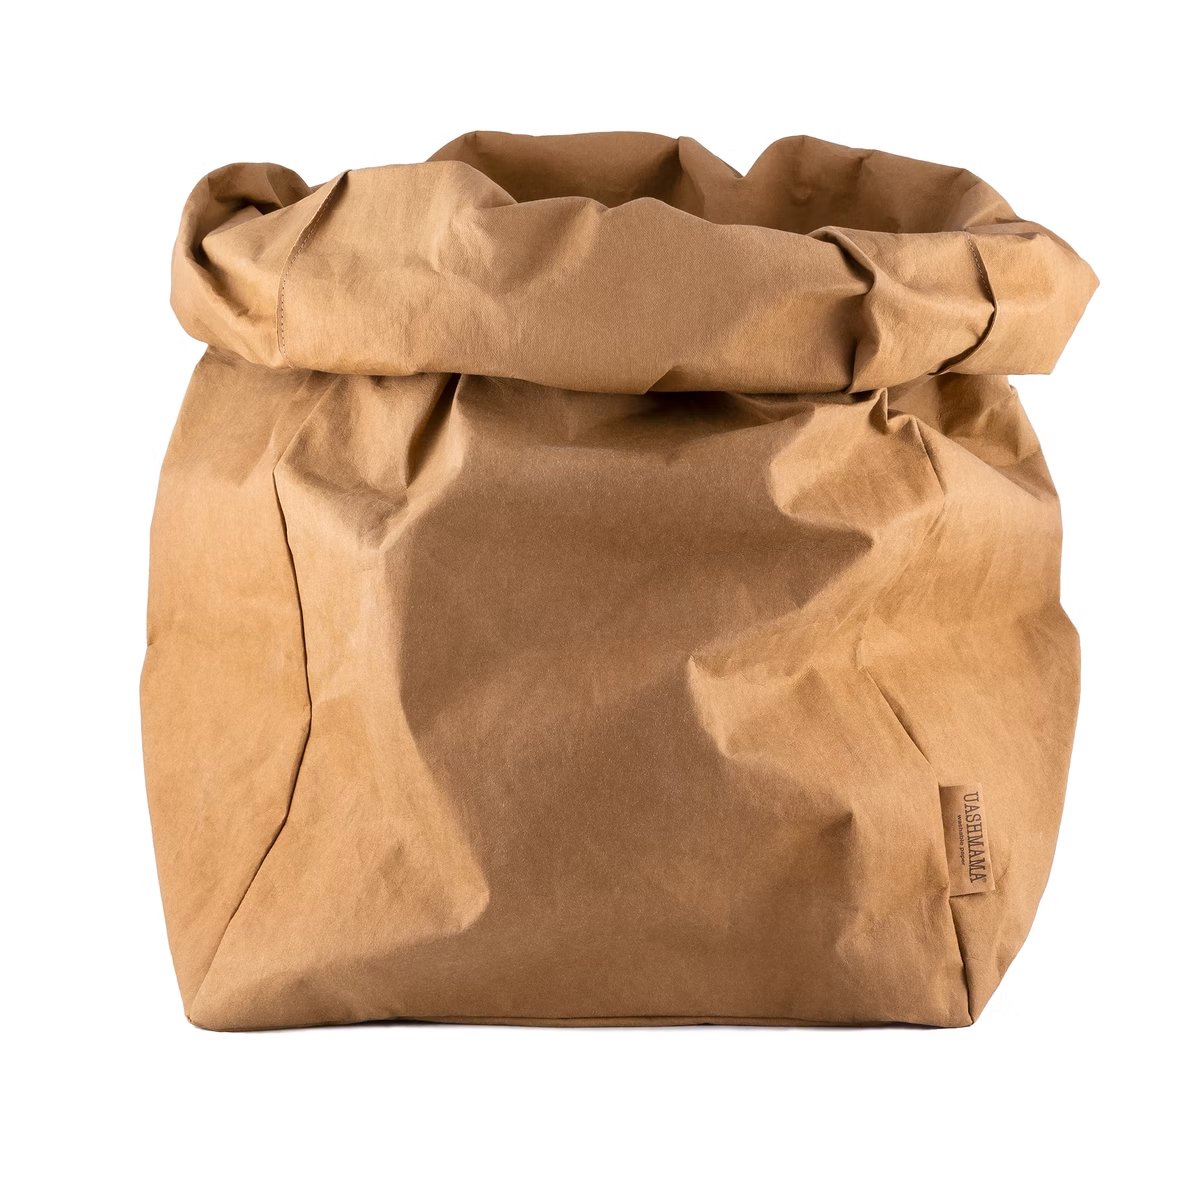 A washable paper bag is shown. The bag is rolled down at the top and features a UASHMAMA logo label on the bottom left corner. The bag pictured is the gigantic size in tan.